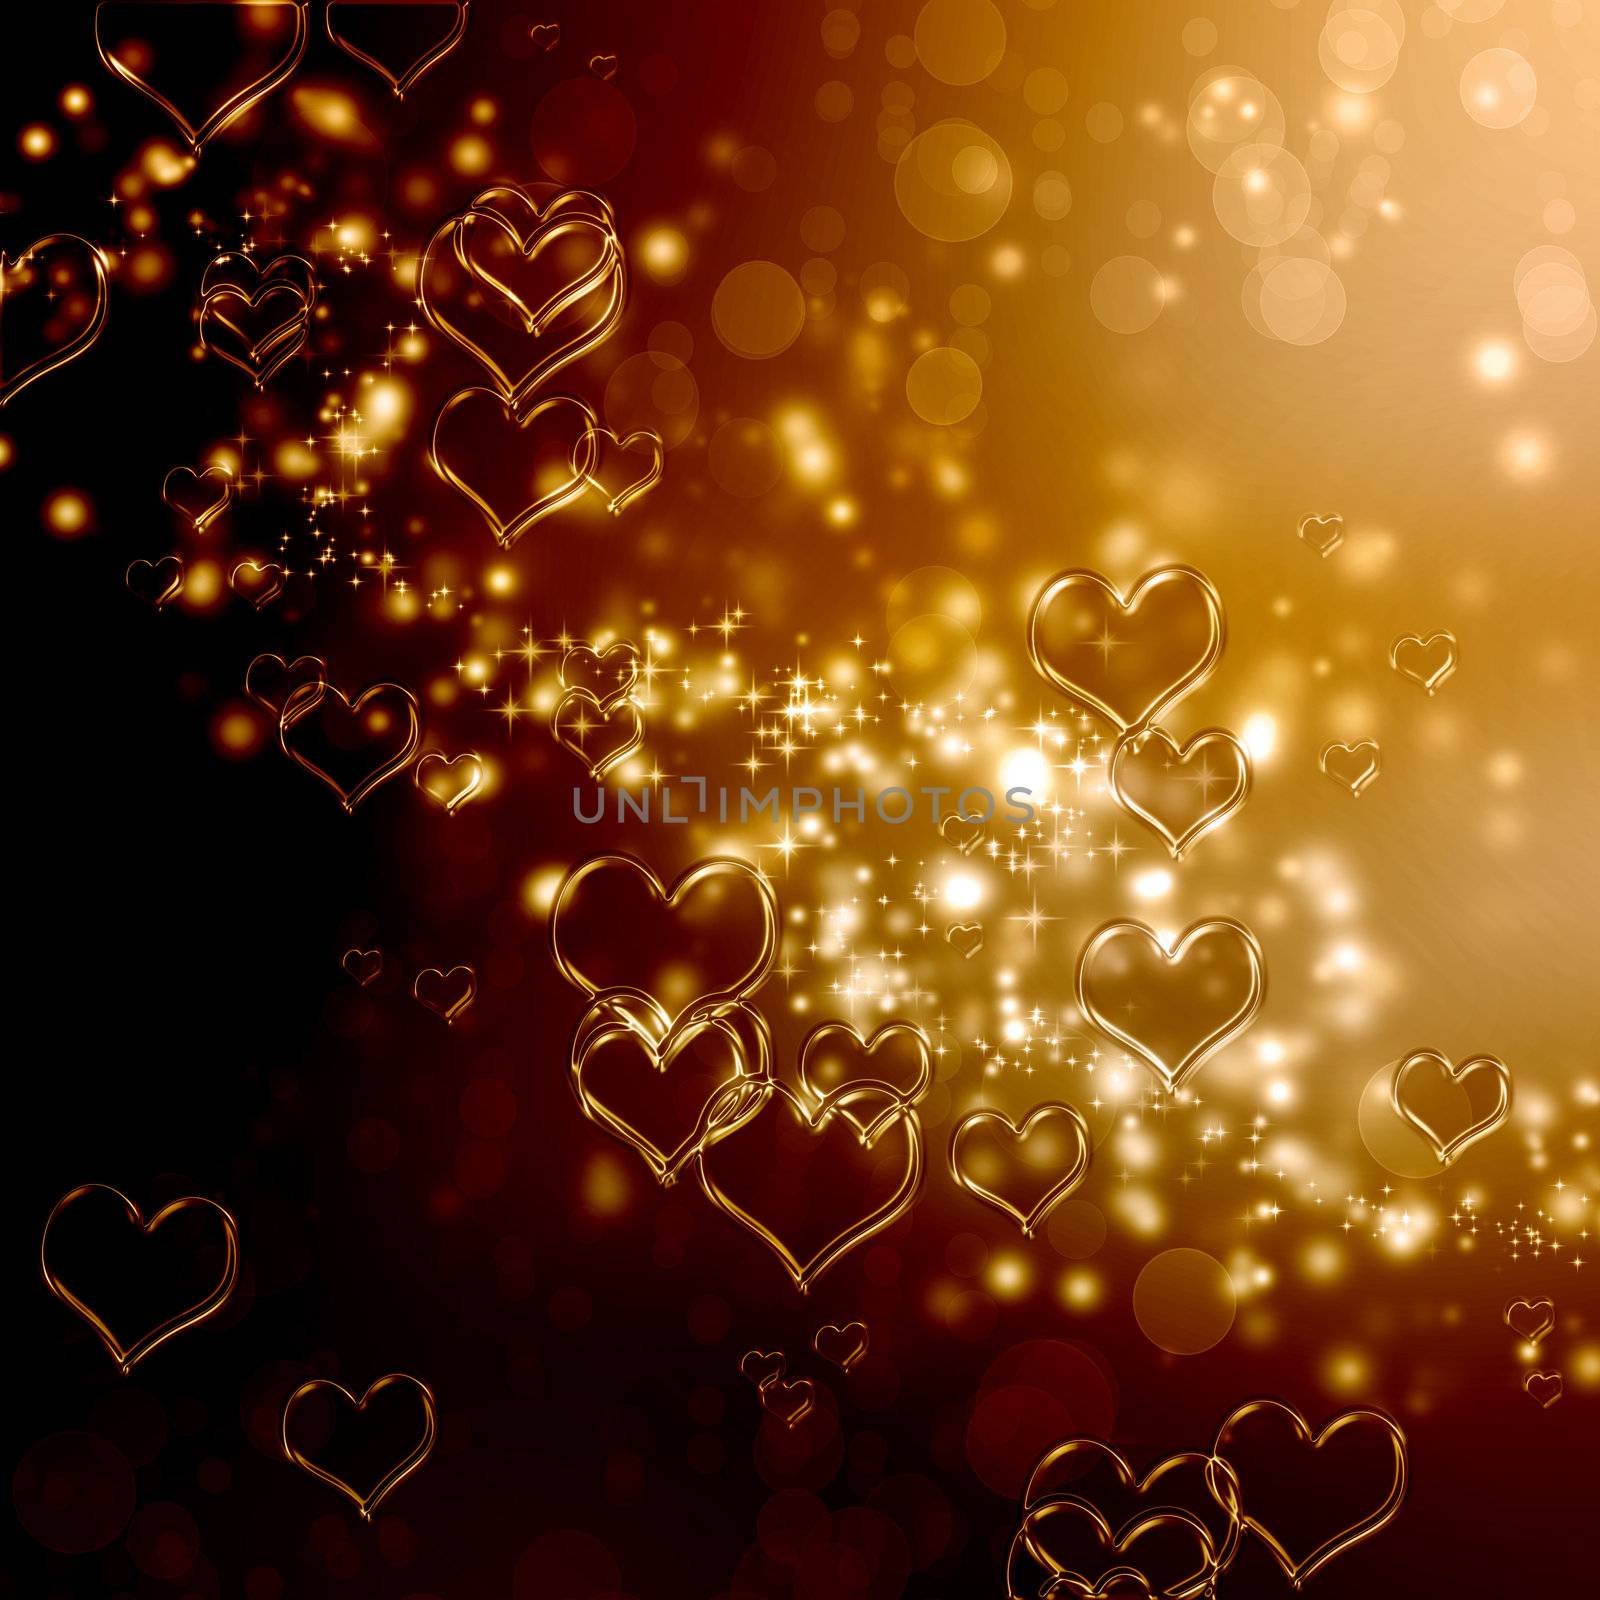 Clear shiny hearts background (gold and brown)